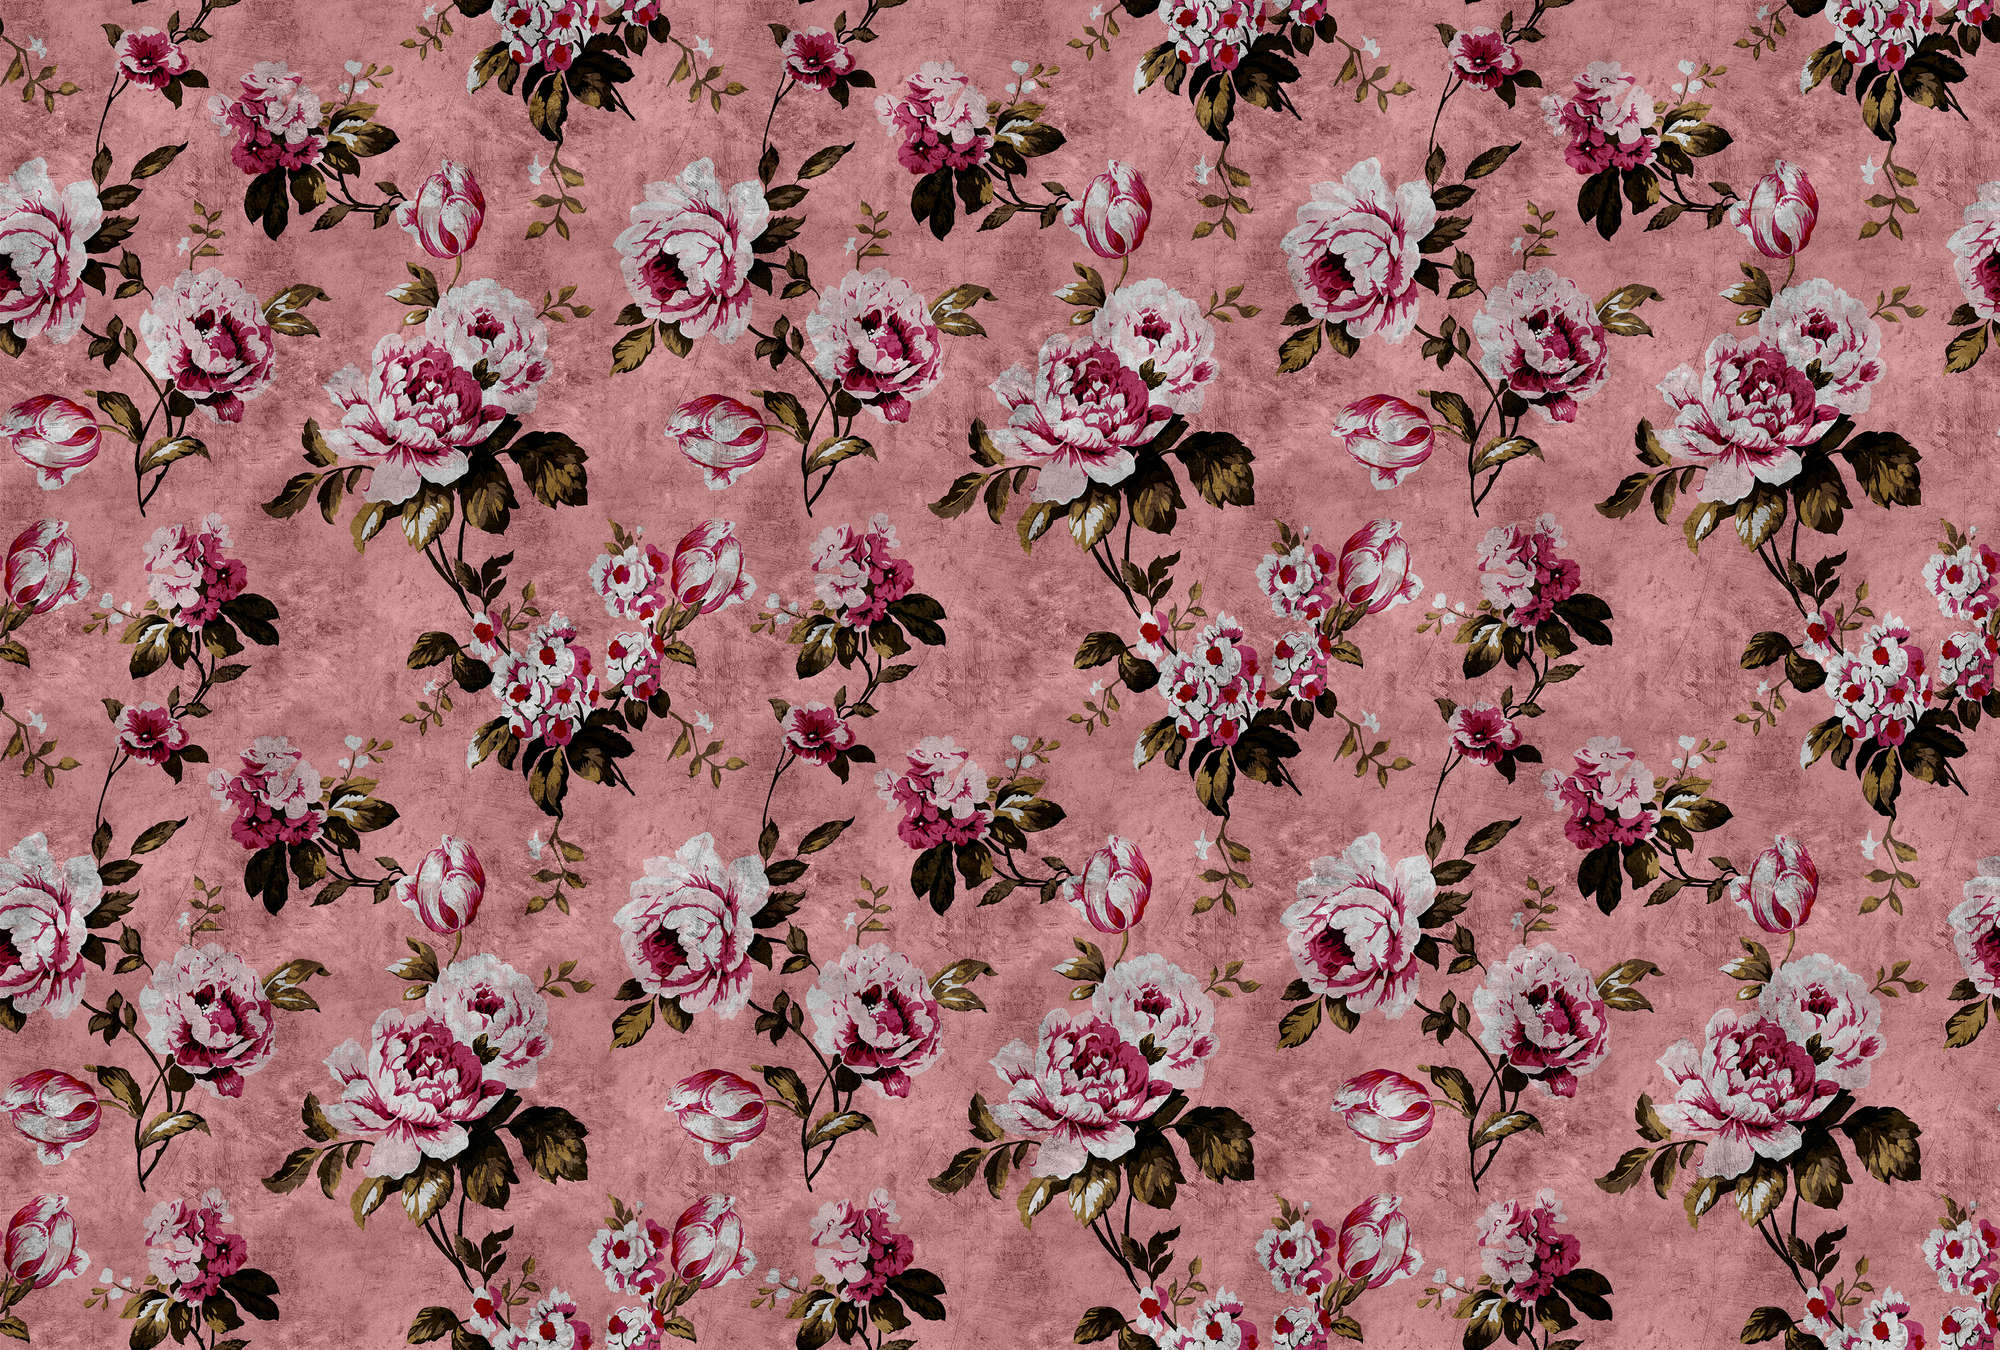             Wild roses 4 - Roses photo wallpaper in retro look, pink in scratchy structure - Pink, Red | Structure Non-woven
        